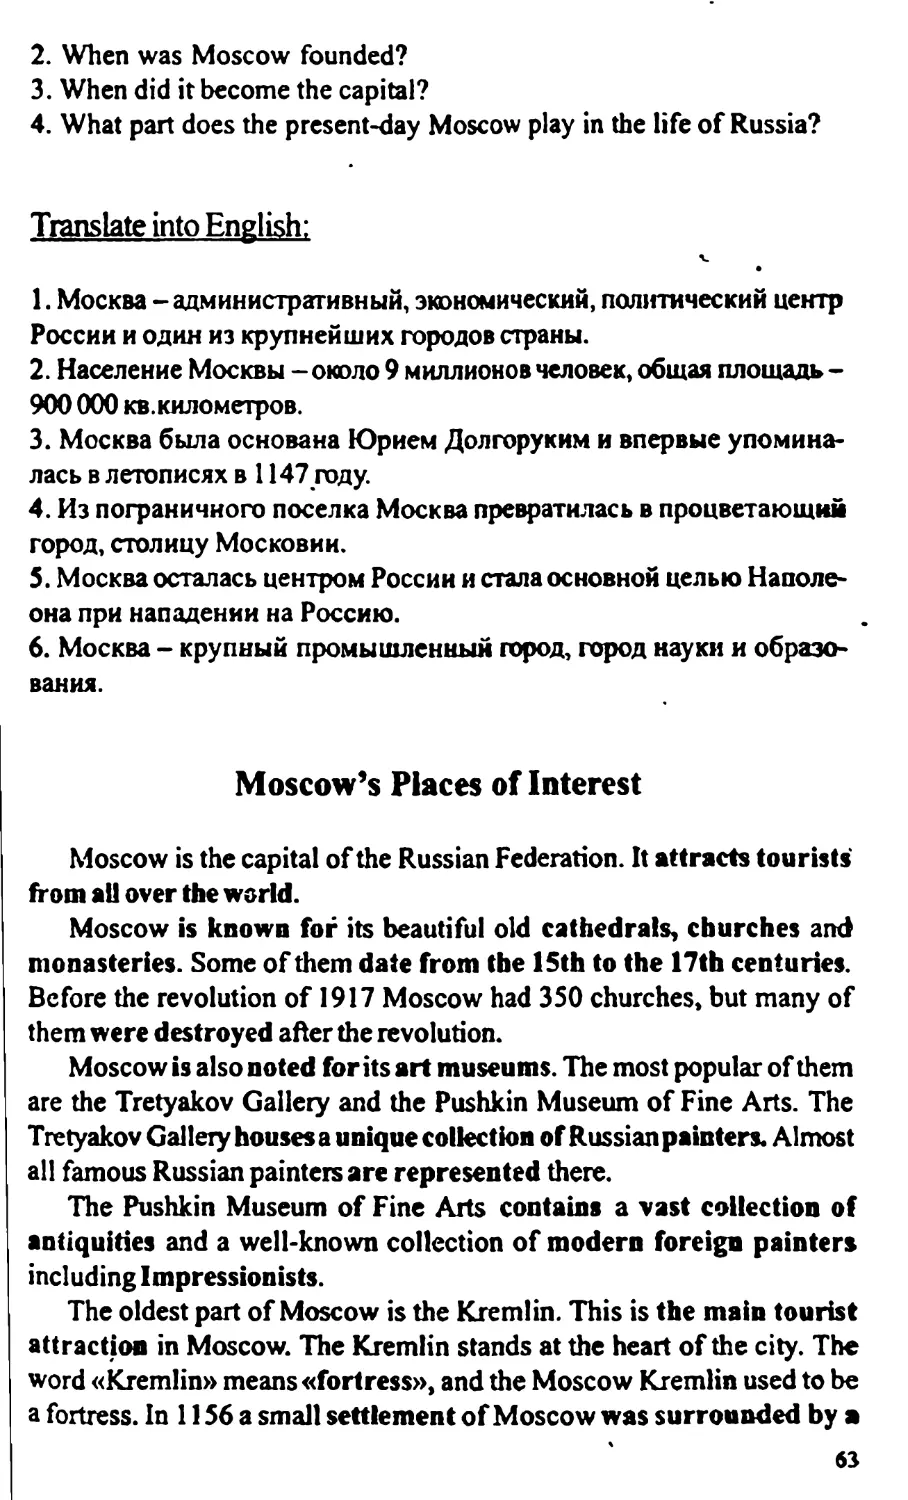 Moscow’s Places of Interest